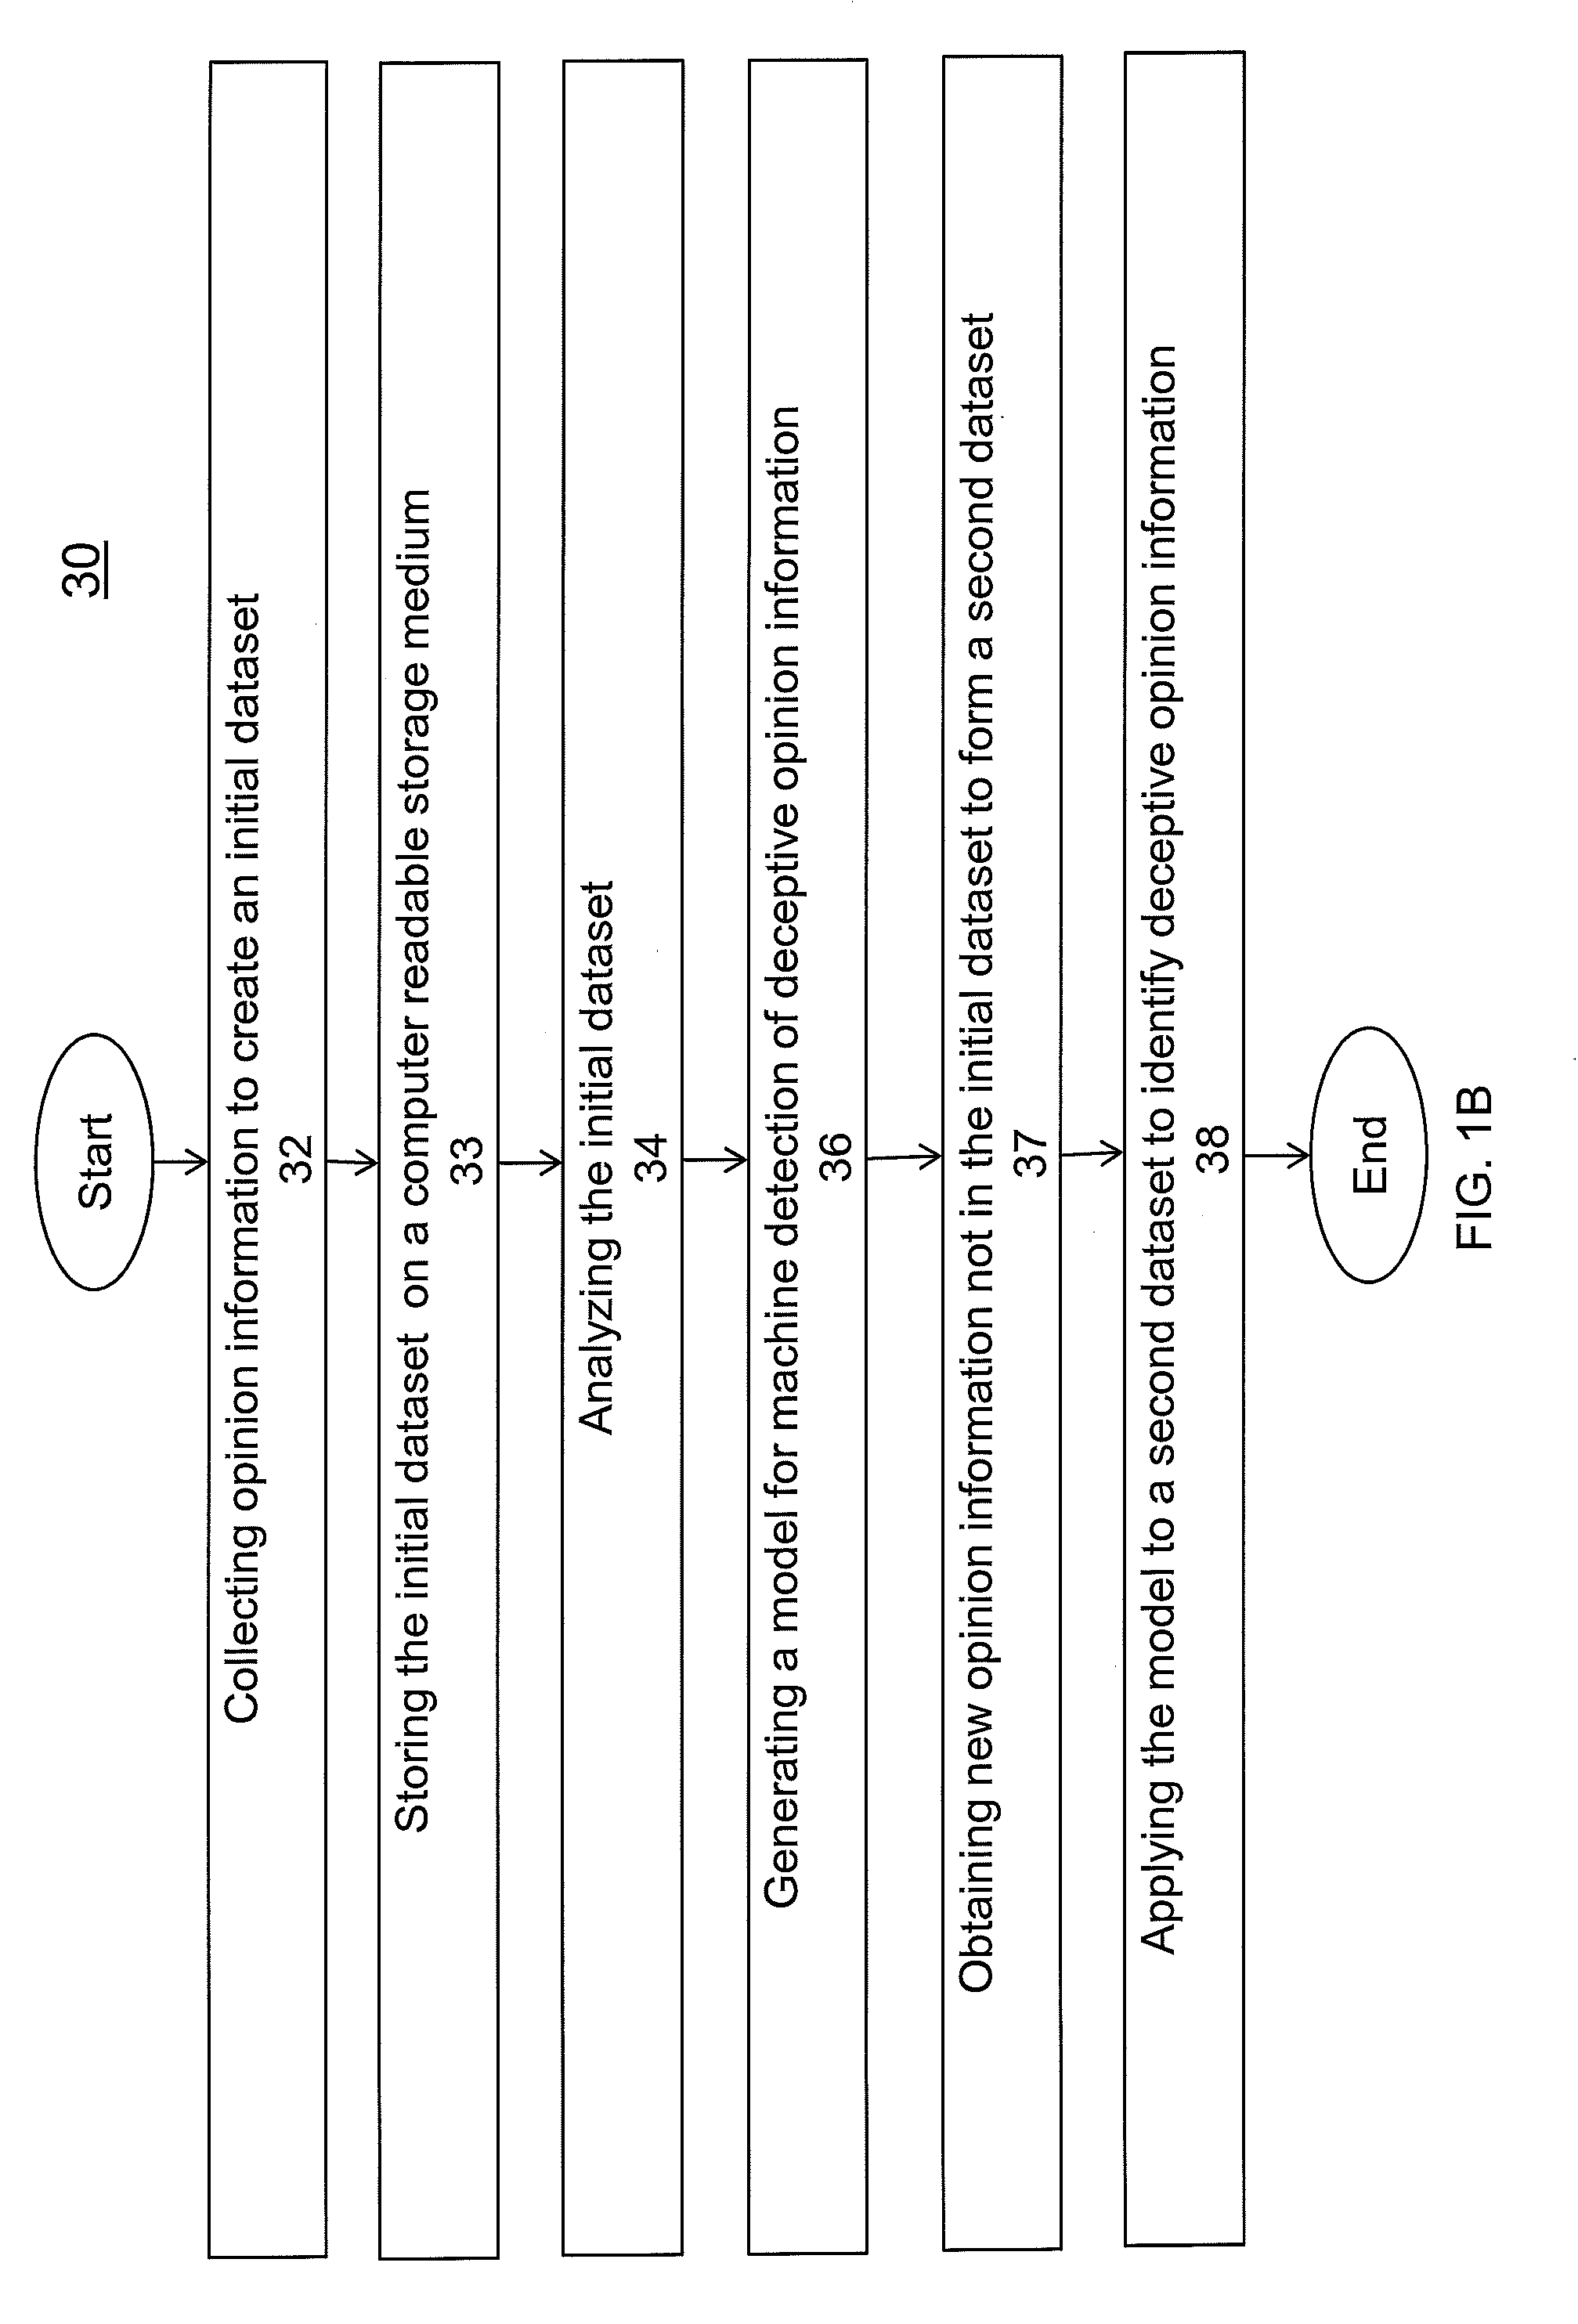 System and methods for automatically detecting deceptive content